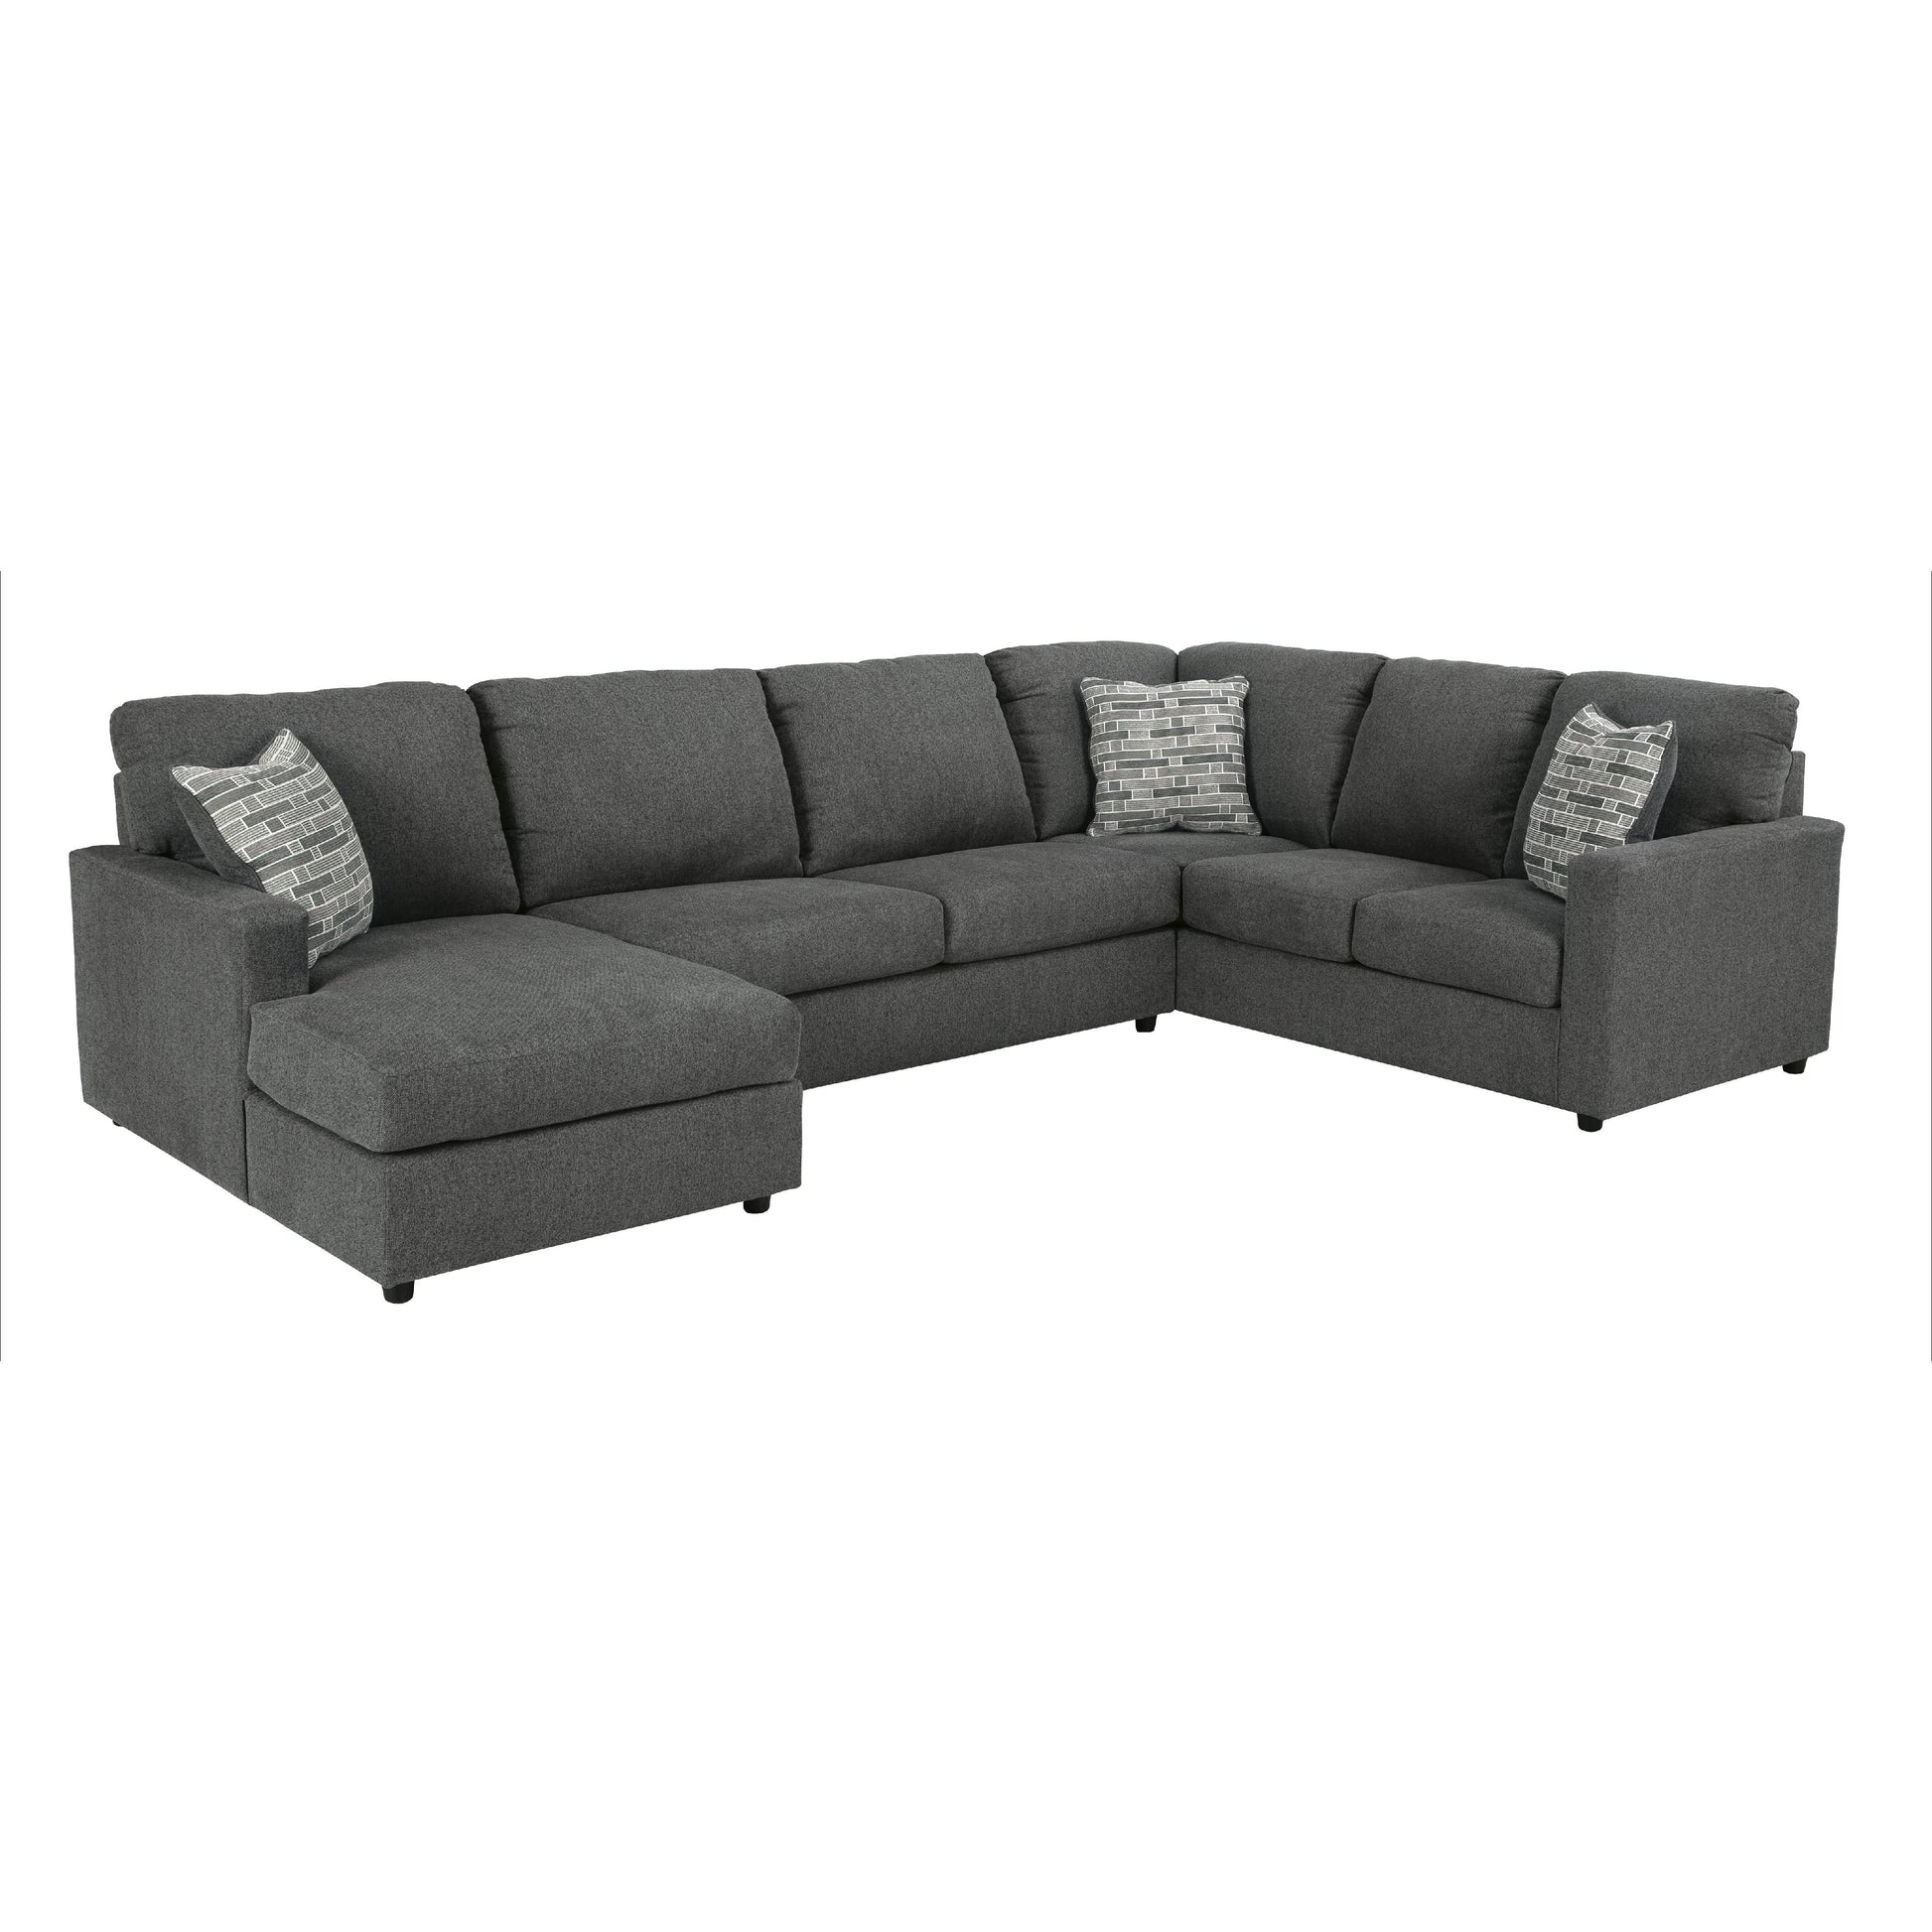 Signature Design by Ashley Edenfield Fabric 3 pc Sectional 2900316/2900334/2900349 IMAGE 1